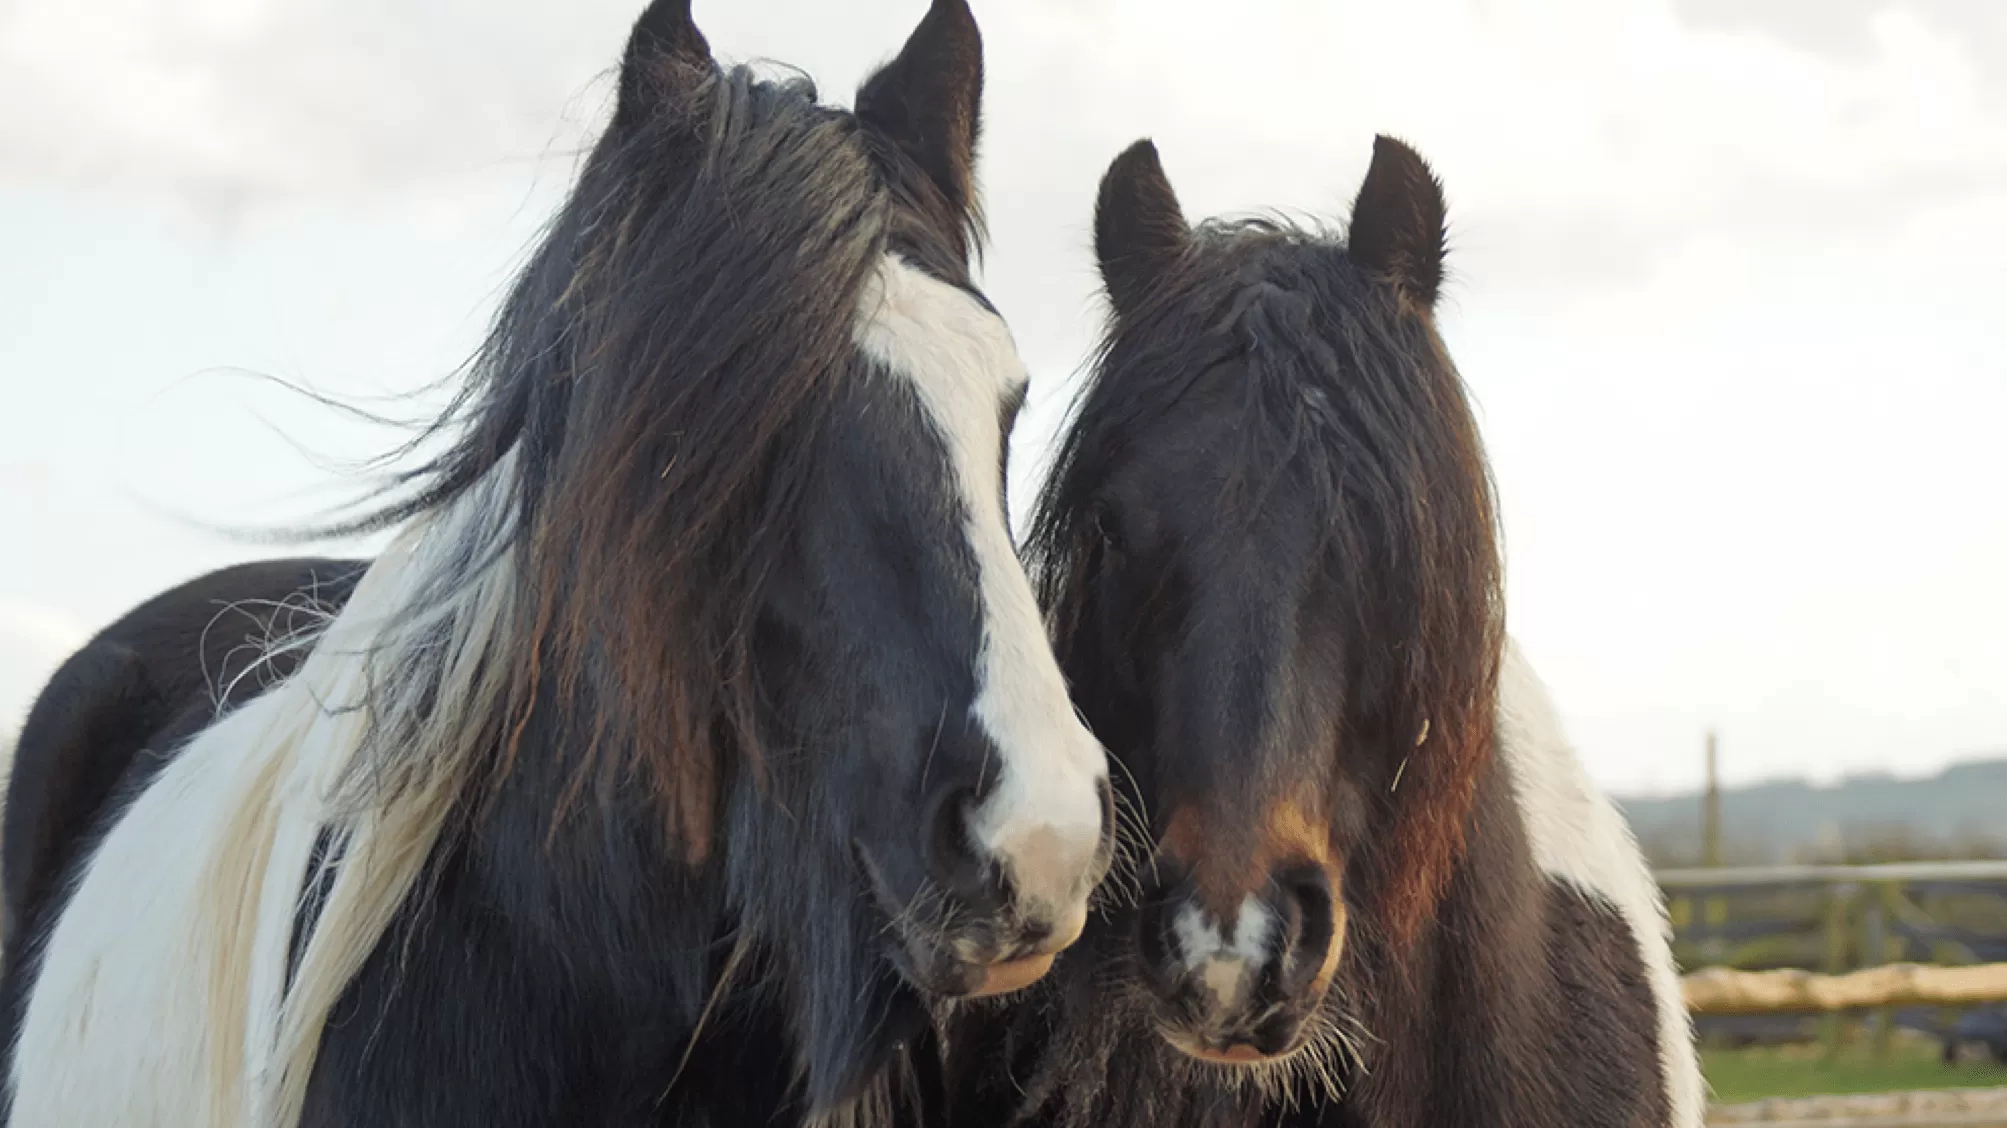 Two horses facing each other